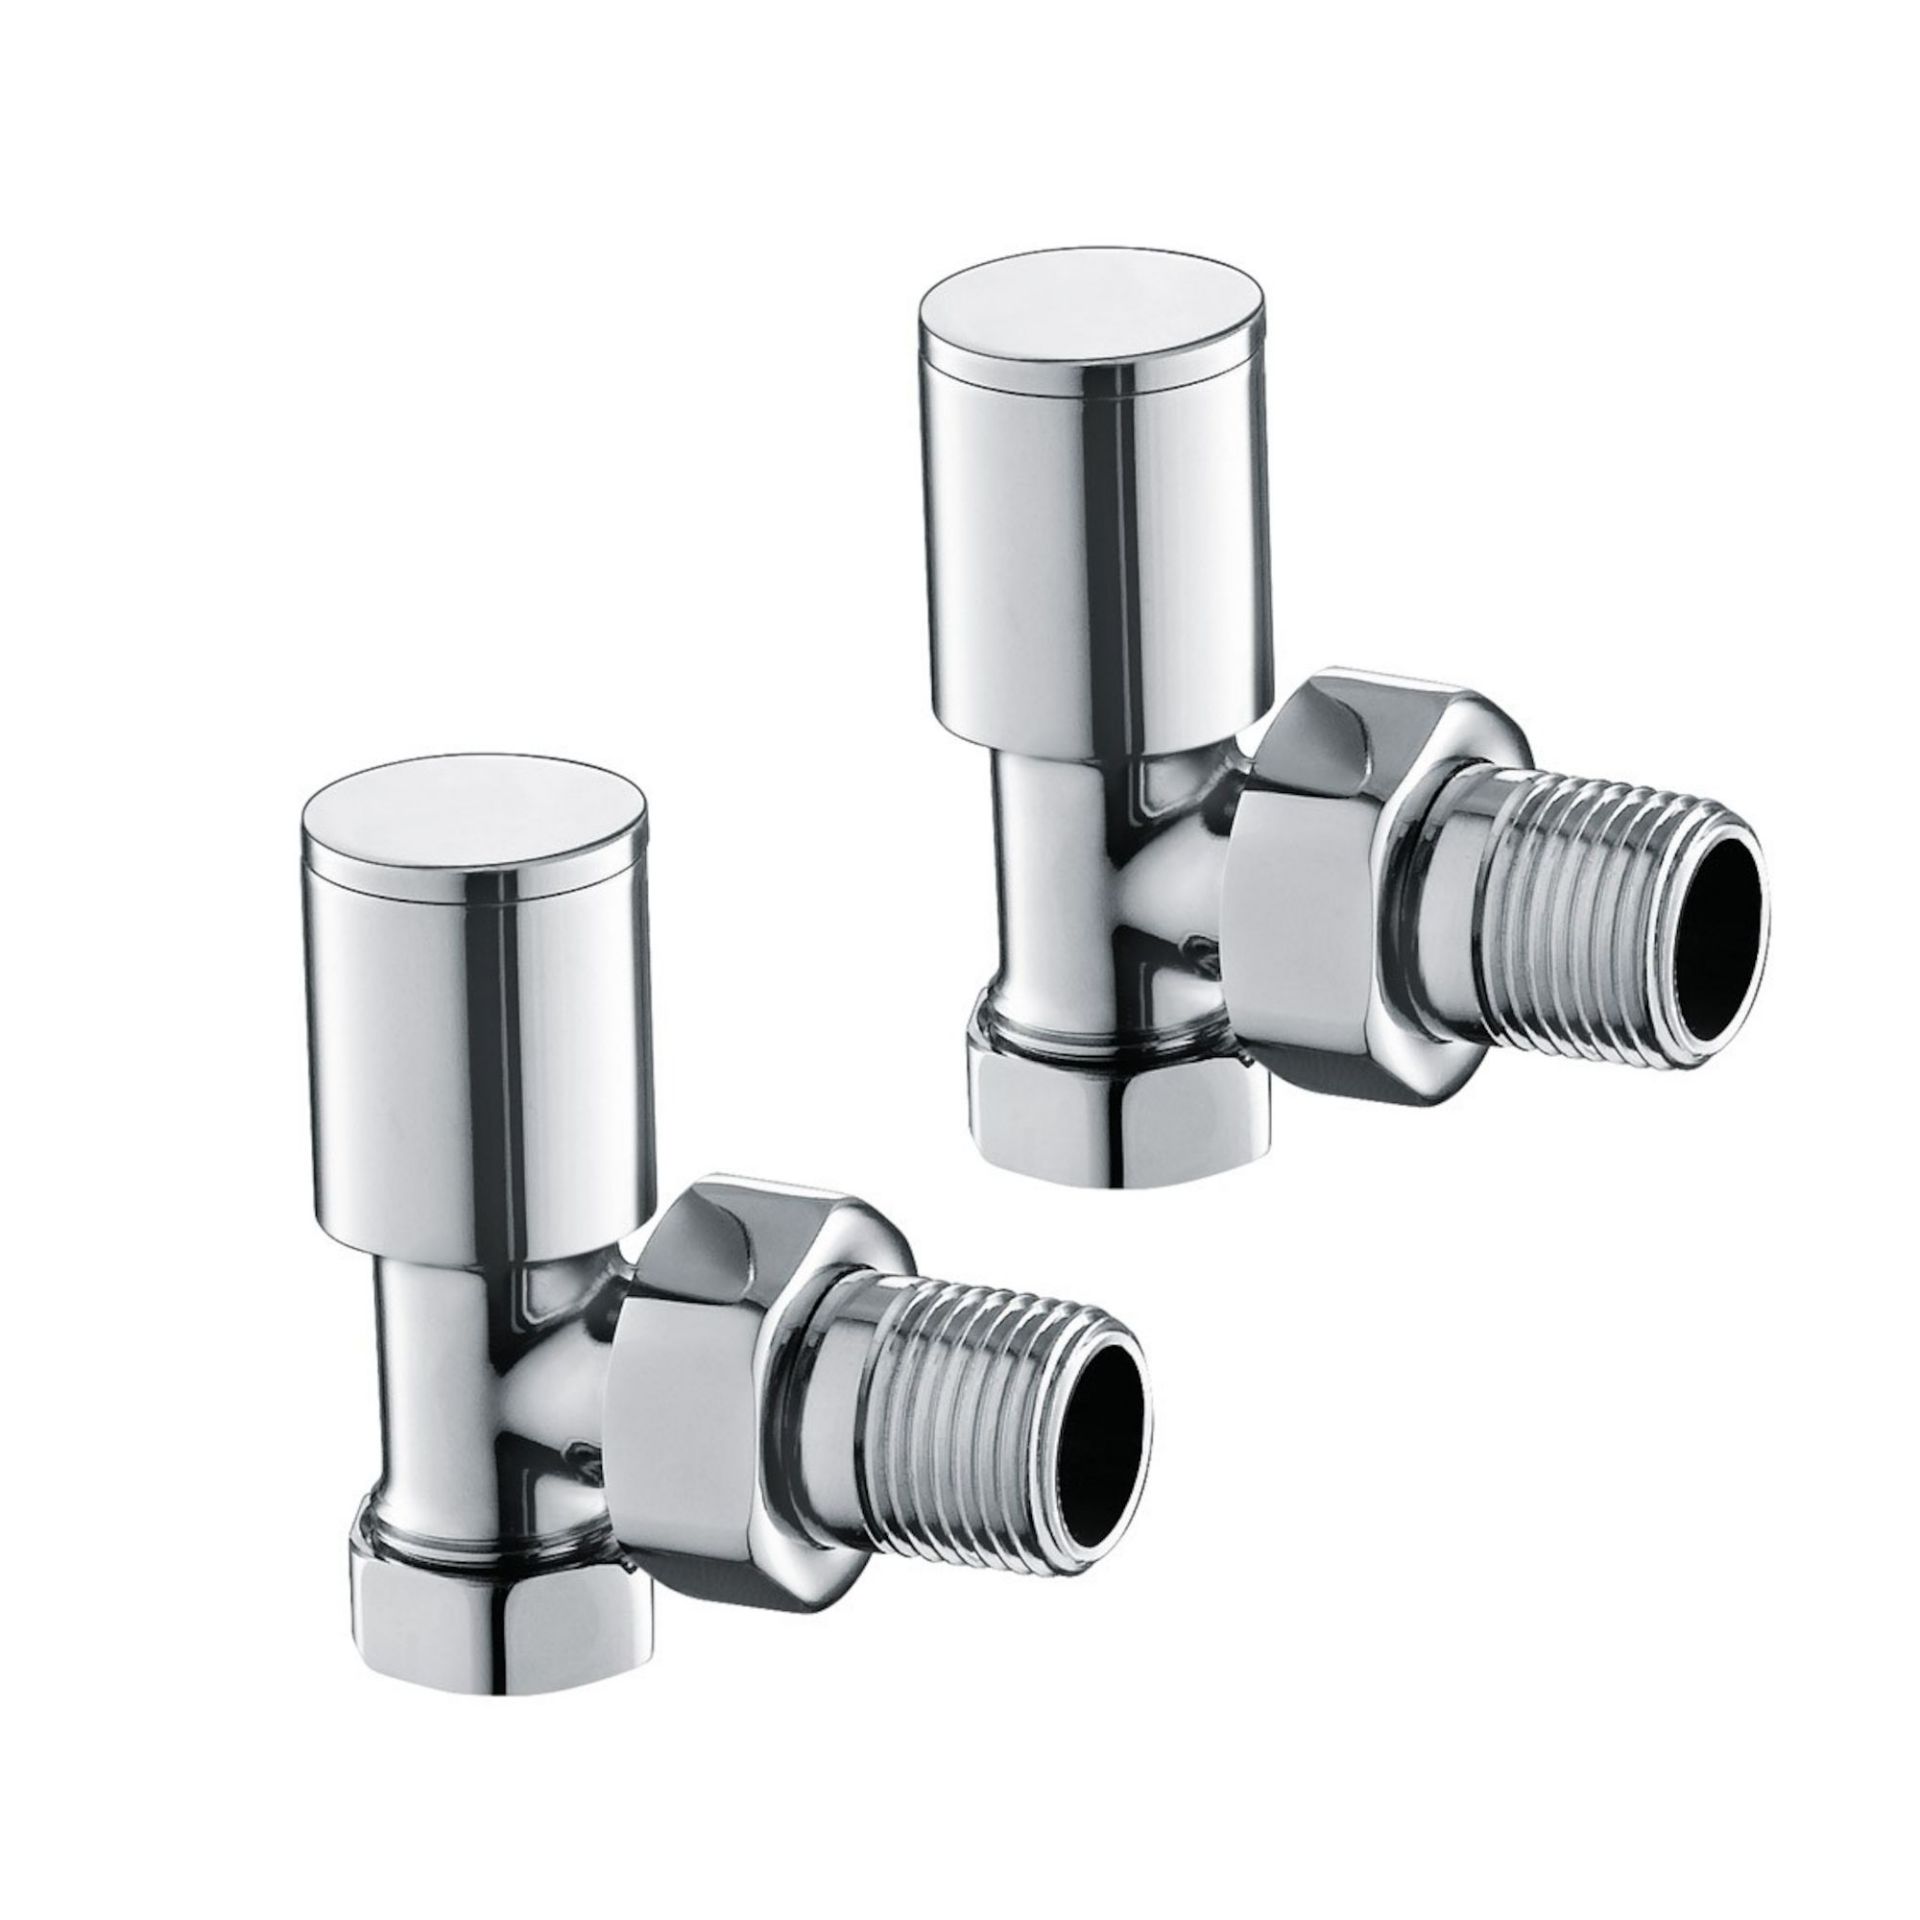 (PT225) 15mm Standard Connection Angled Radiator Valves - Heavy Duty Polished Chrome Plated Brass